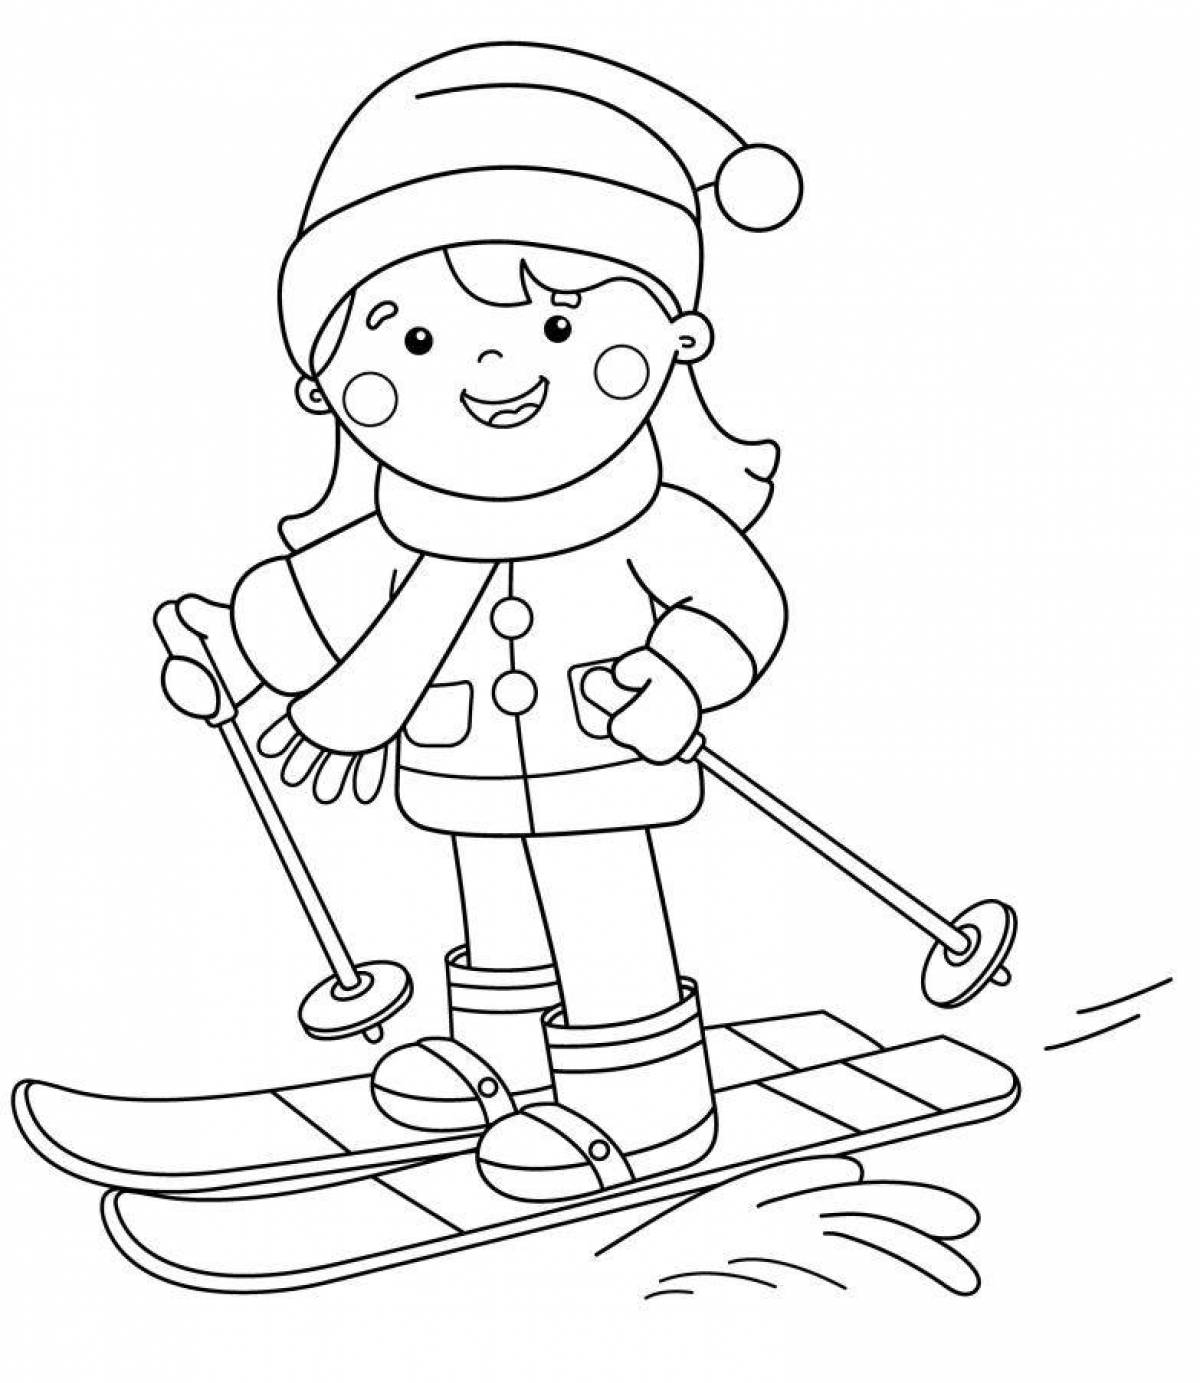 Inspiring coloring book for kids winter sports